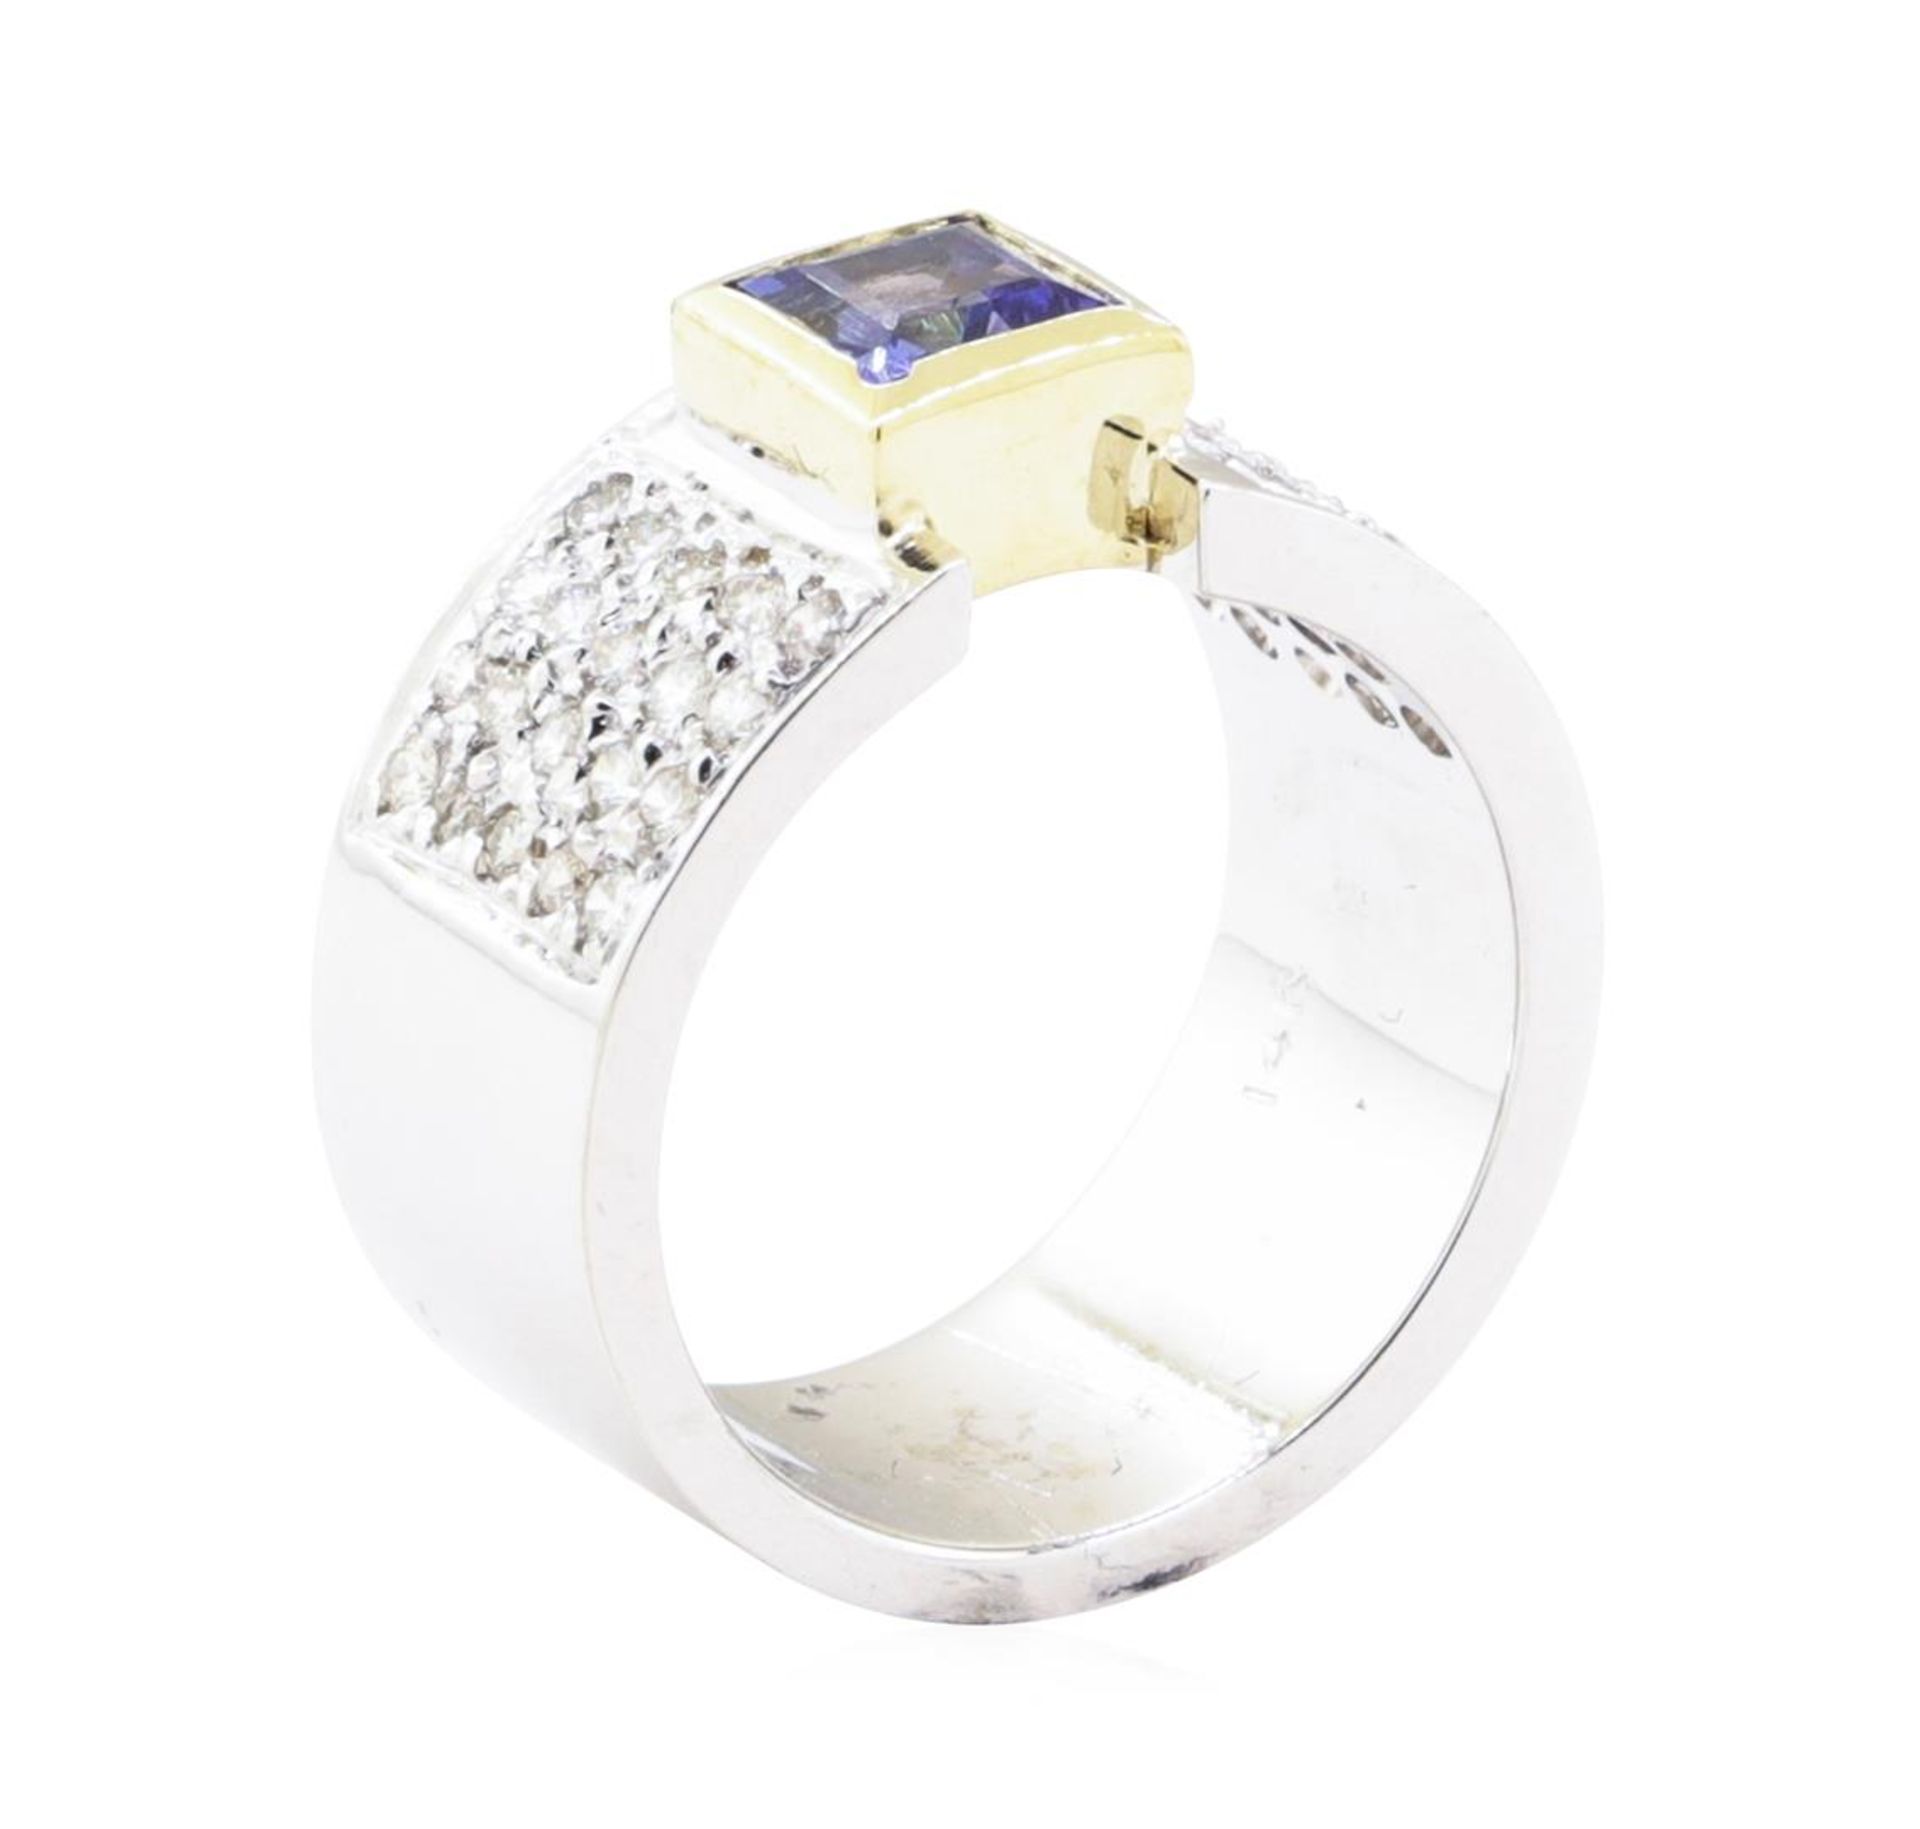 1.20 ctw Tanzanite And Diamond Ring - 14KT White And Yellow Gold - Image 4 of 5